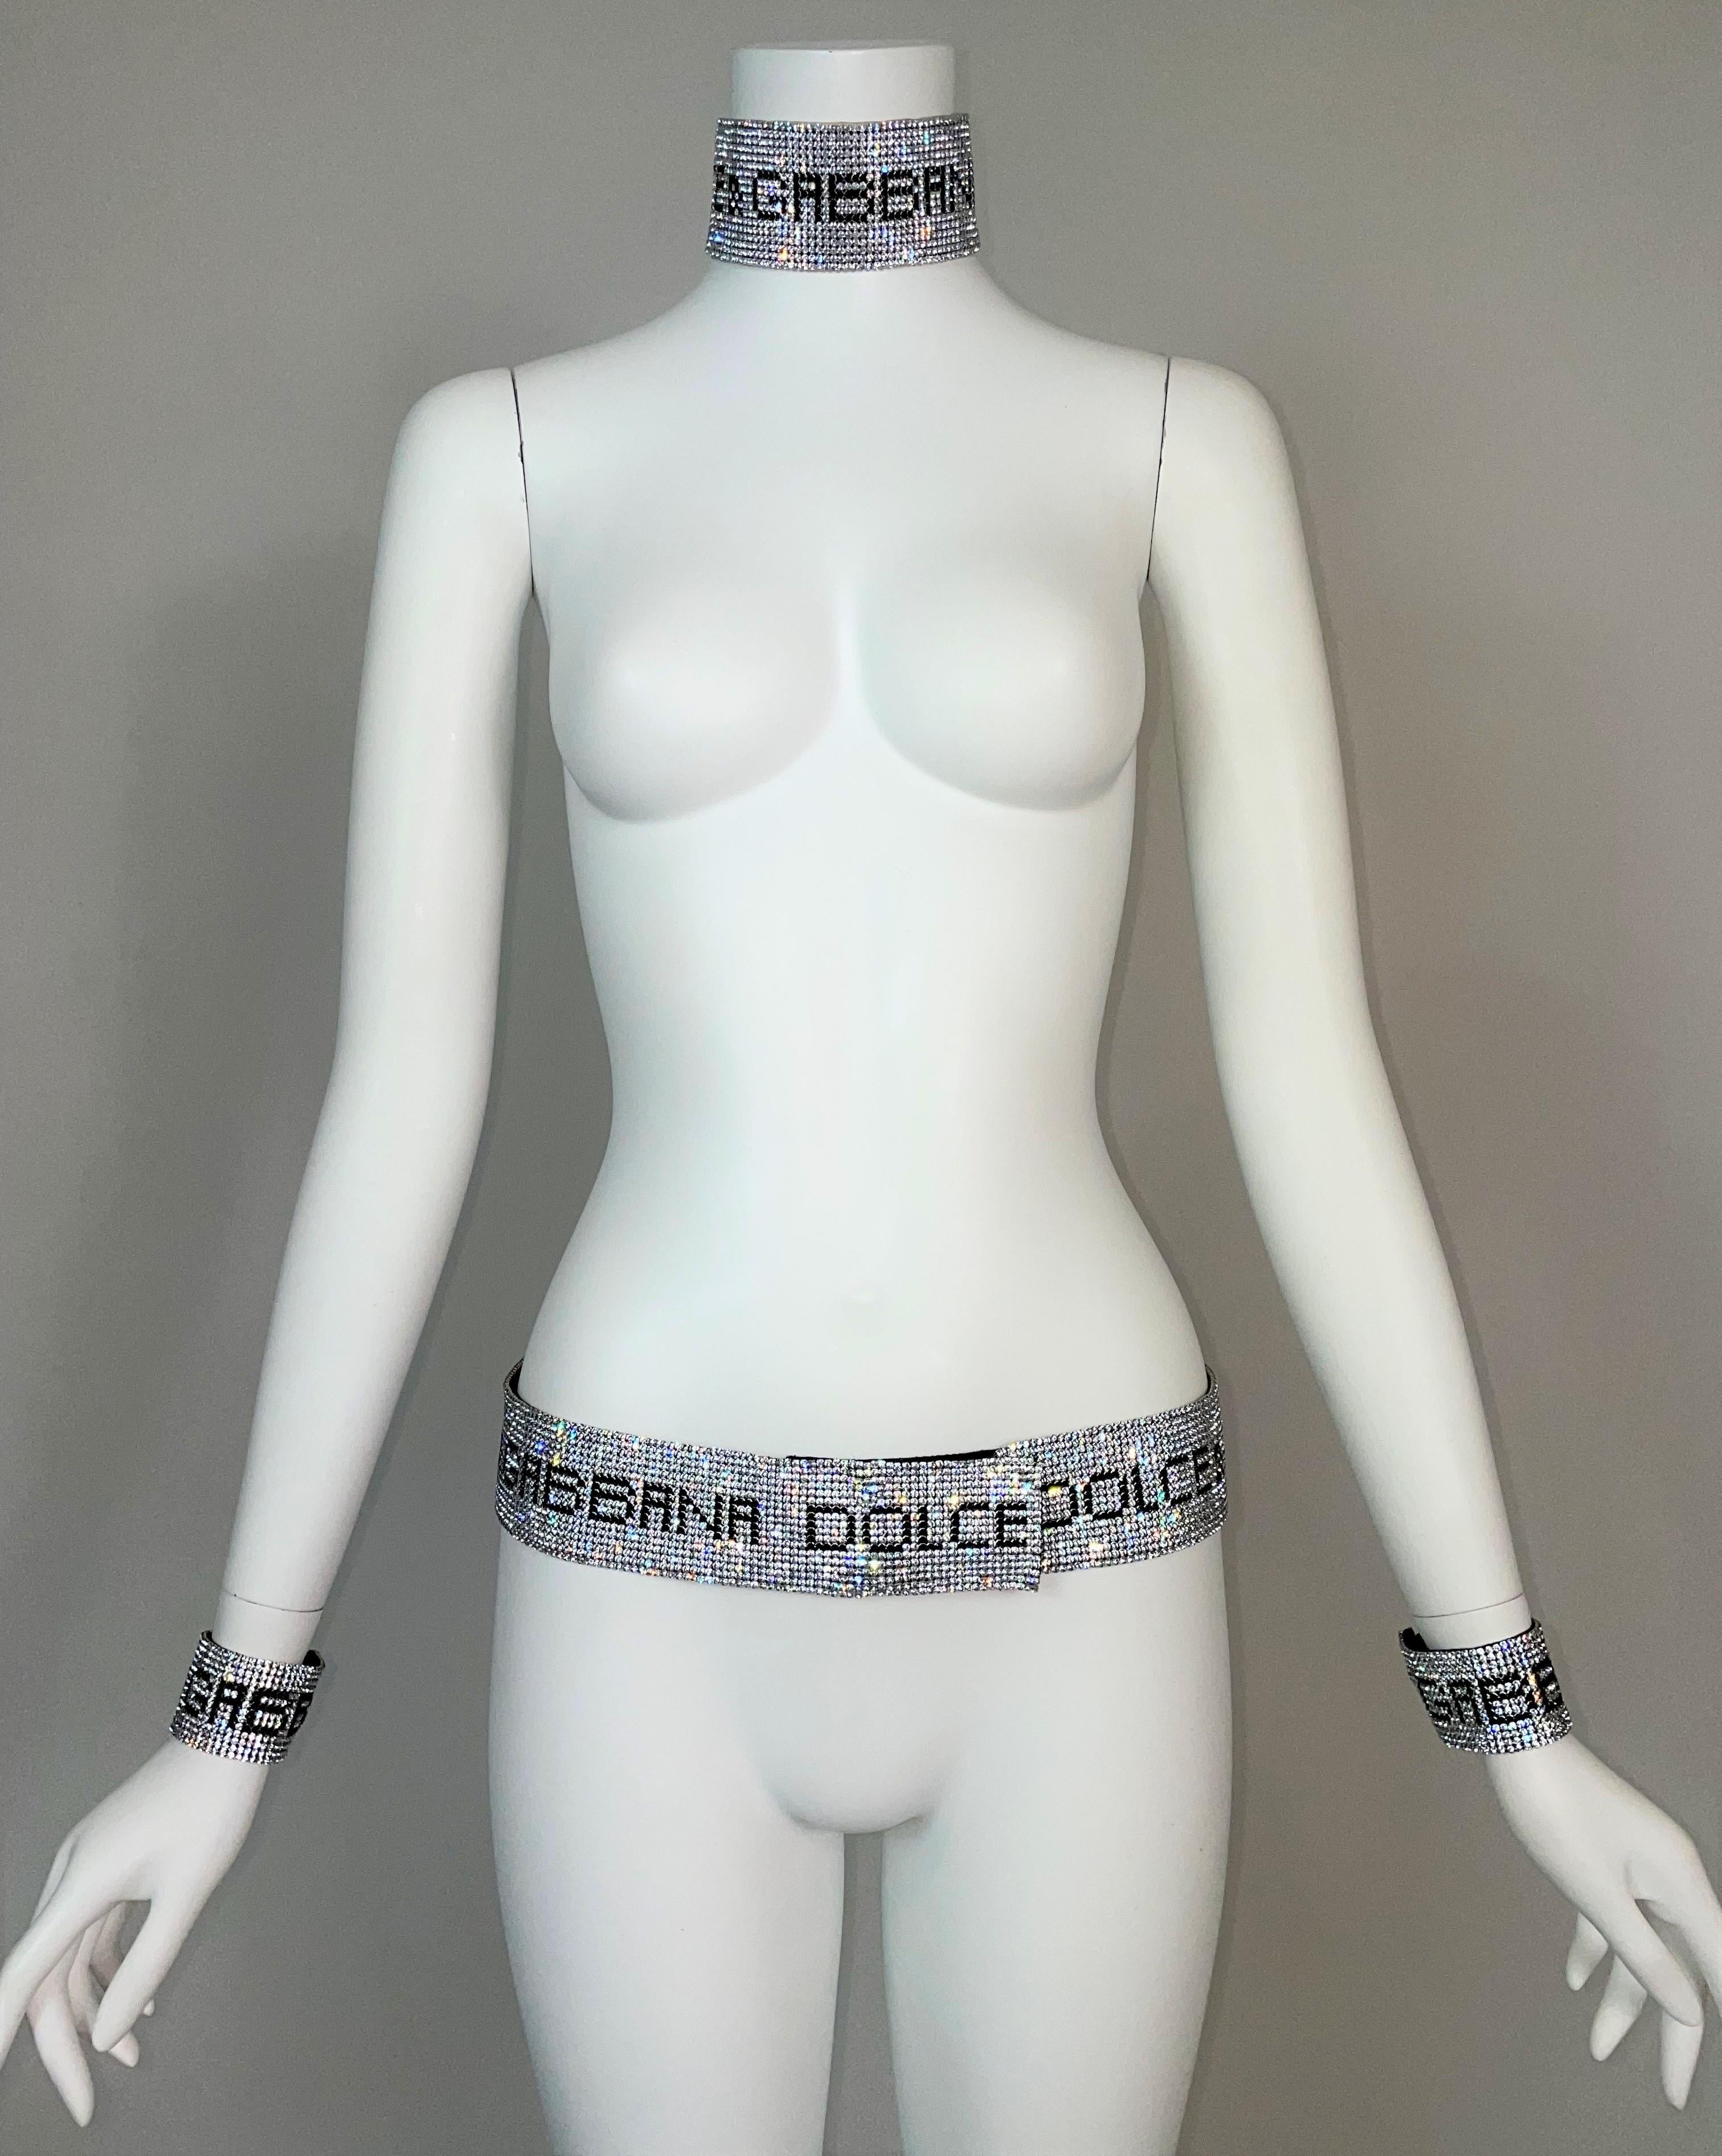 DESIGNER: S/S 2000 Dolce & Gabbana

Please contact us for more images and/or information.

CONDITION: Good- only faint color on lining of belt just from time

FABRIC: Crystal- Metal- Silk

COUNTRY: Italy